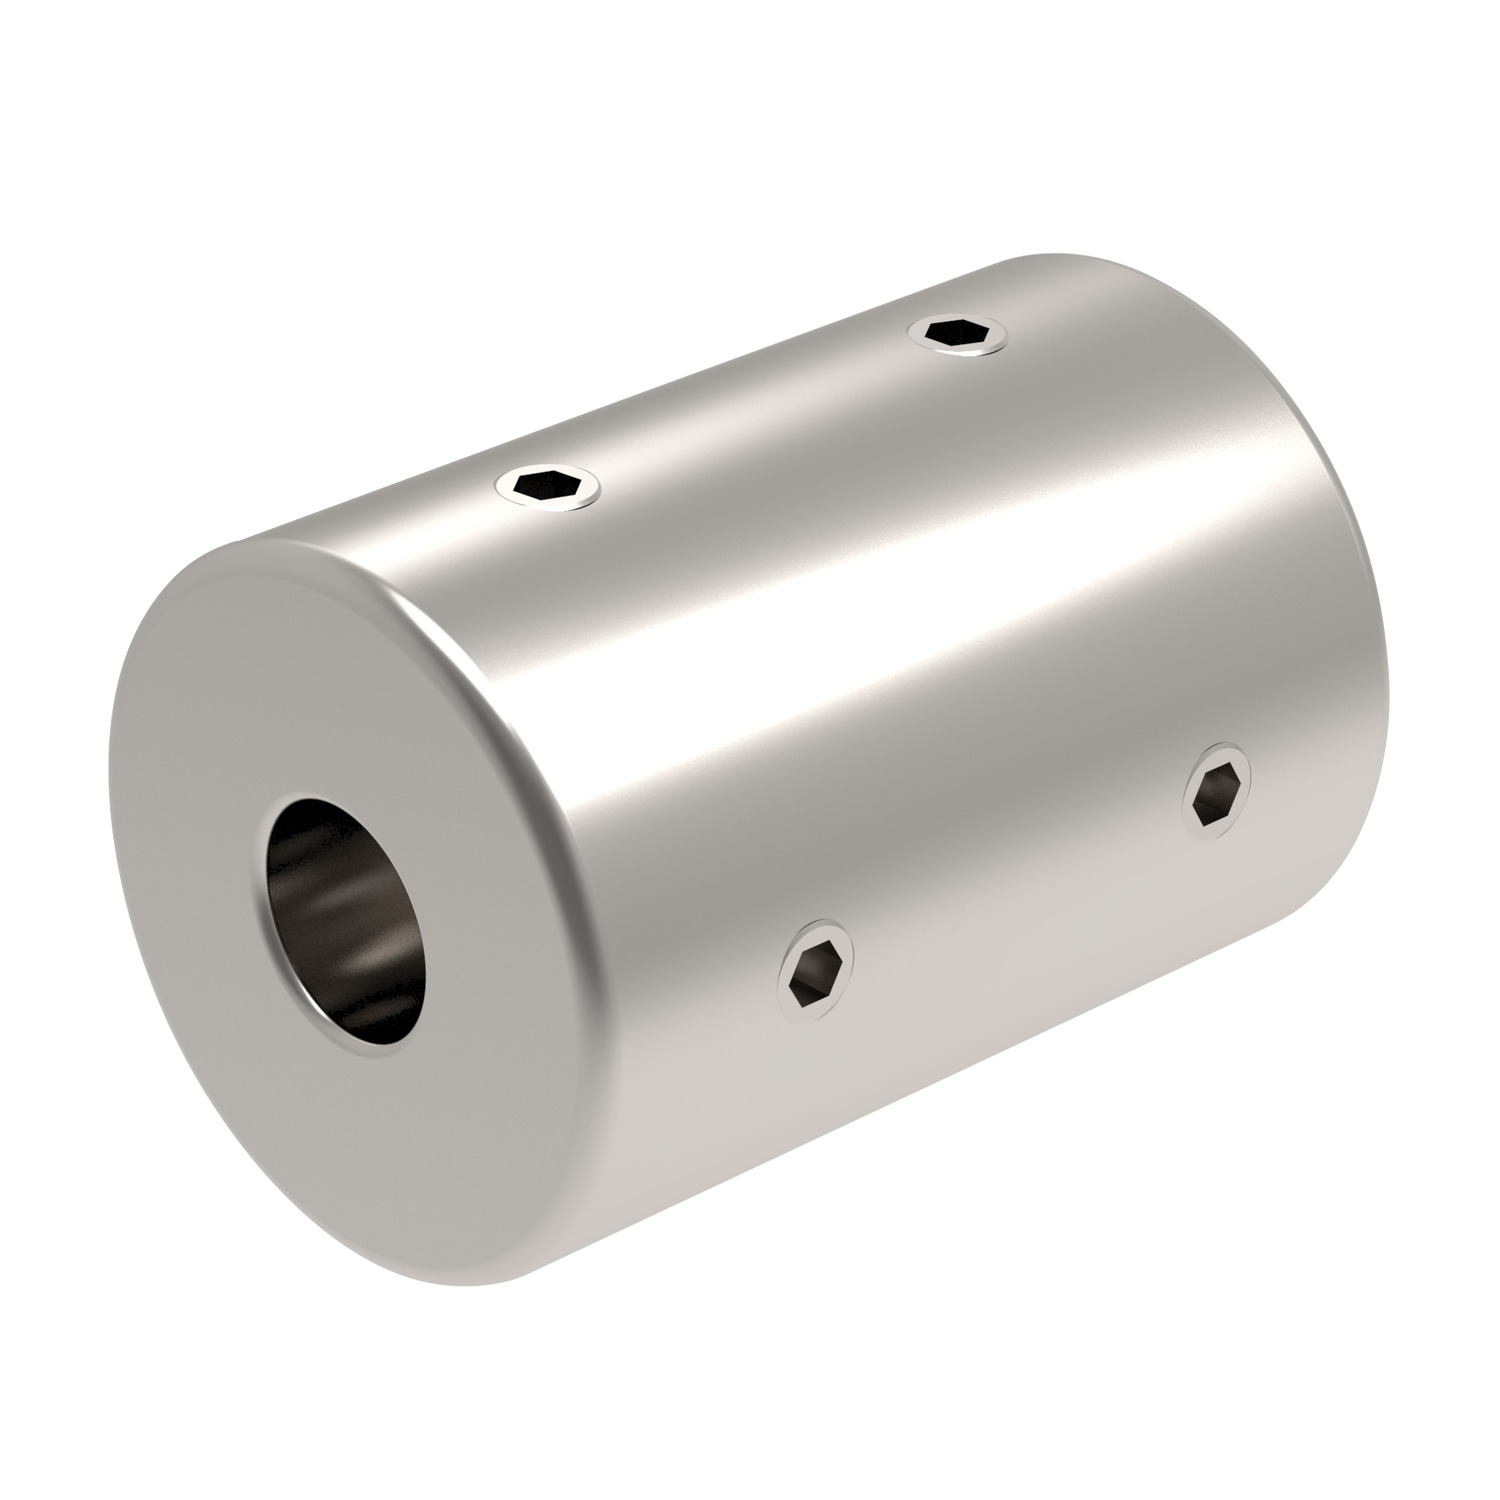 Product R3209, Rigid Shaft Coupling - One Piece Stainless, set screw / 